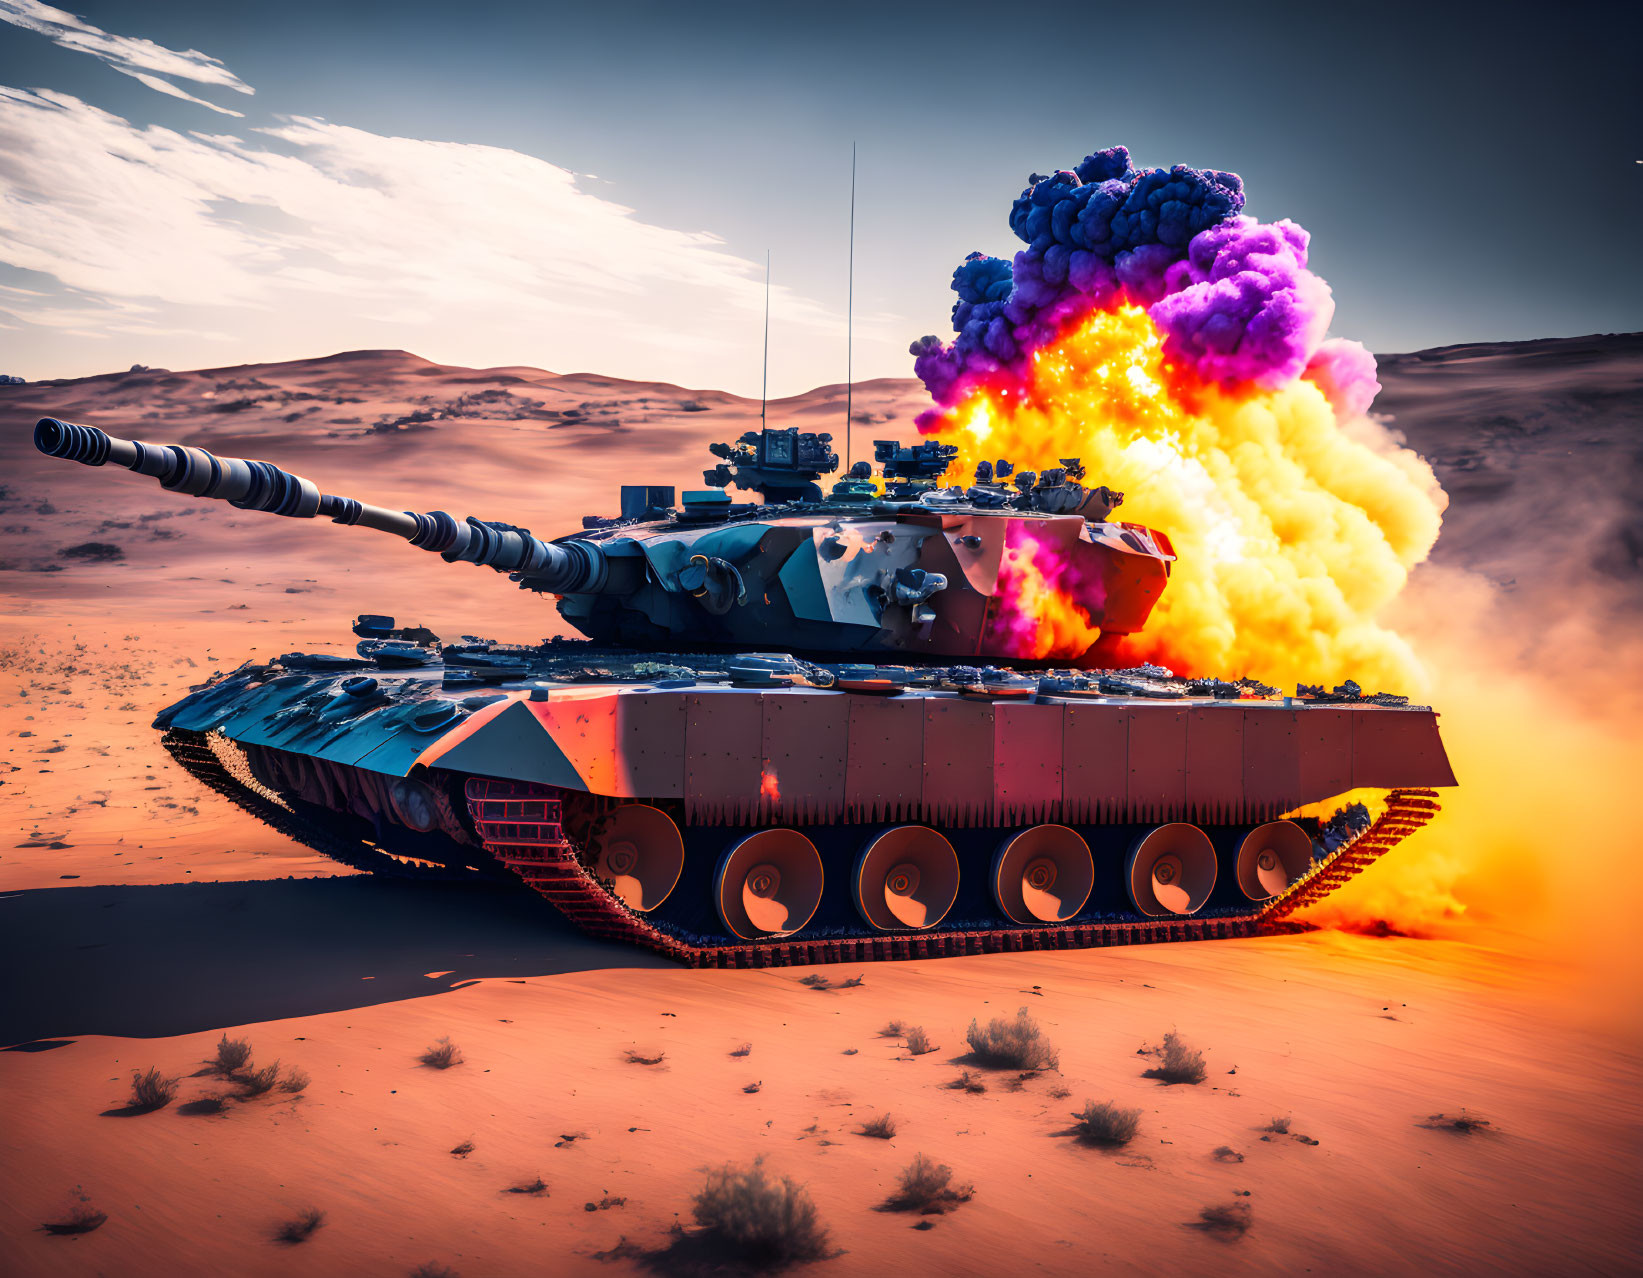 Armored tank with explosive reactive armor in desert landscape with explosive blast and smoke